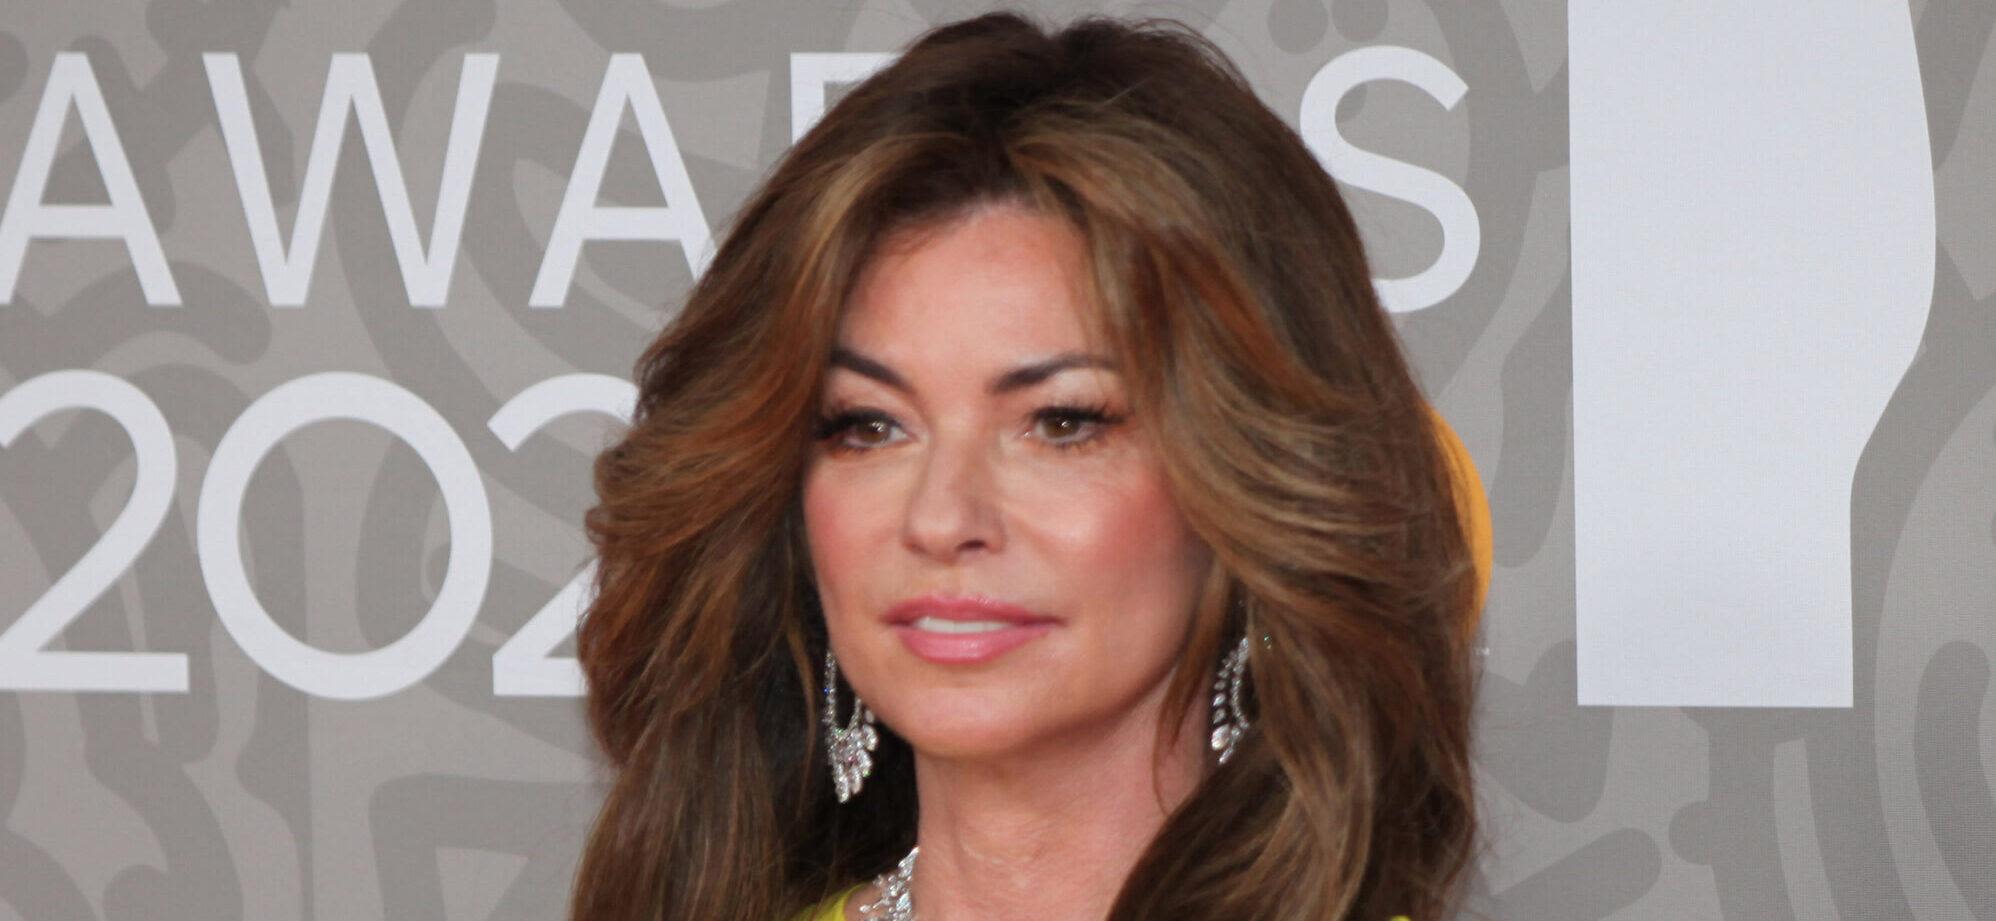 Shania Twain Dubbed 'Unrecognizable' After Bursting Out New Look For 'American Idol'